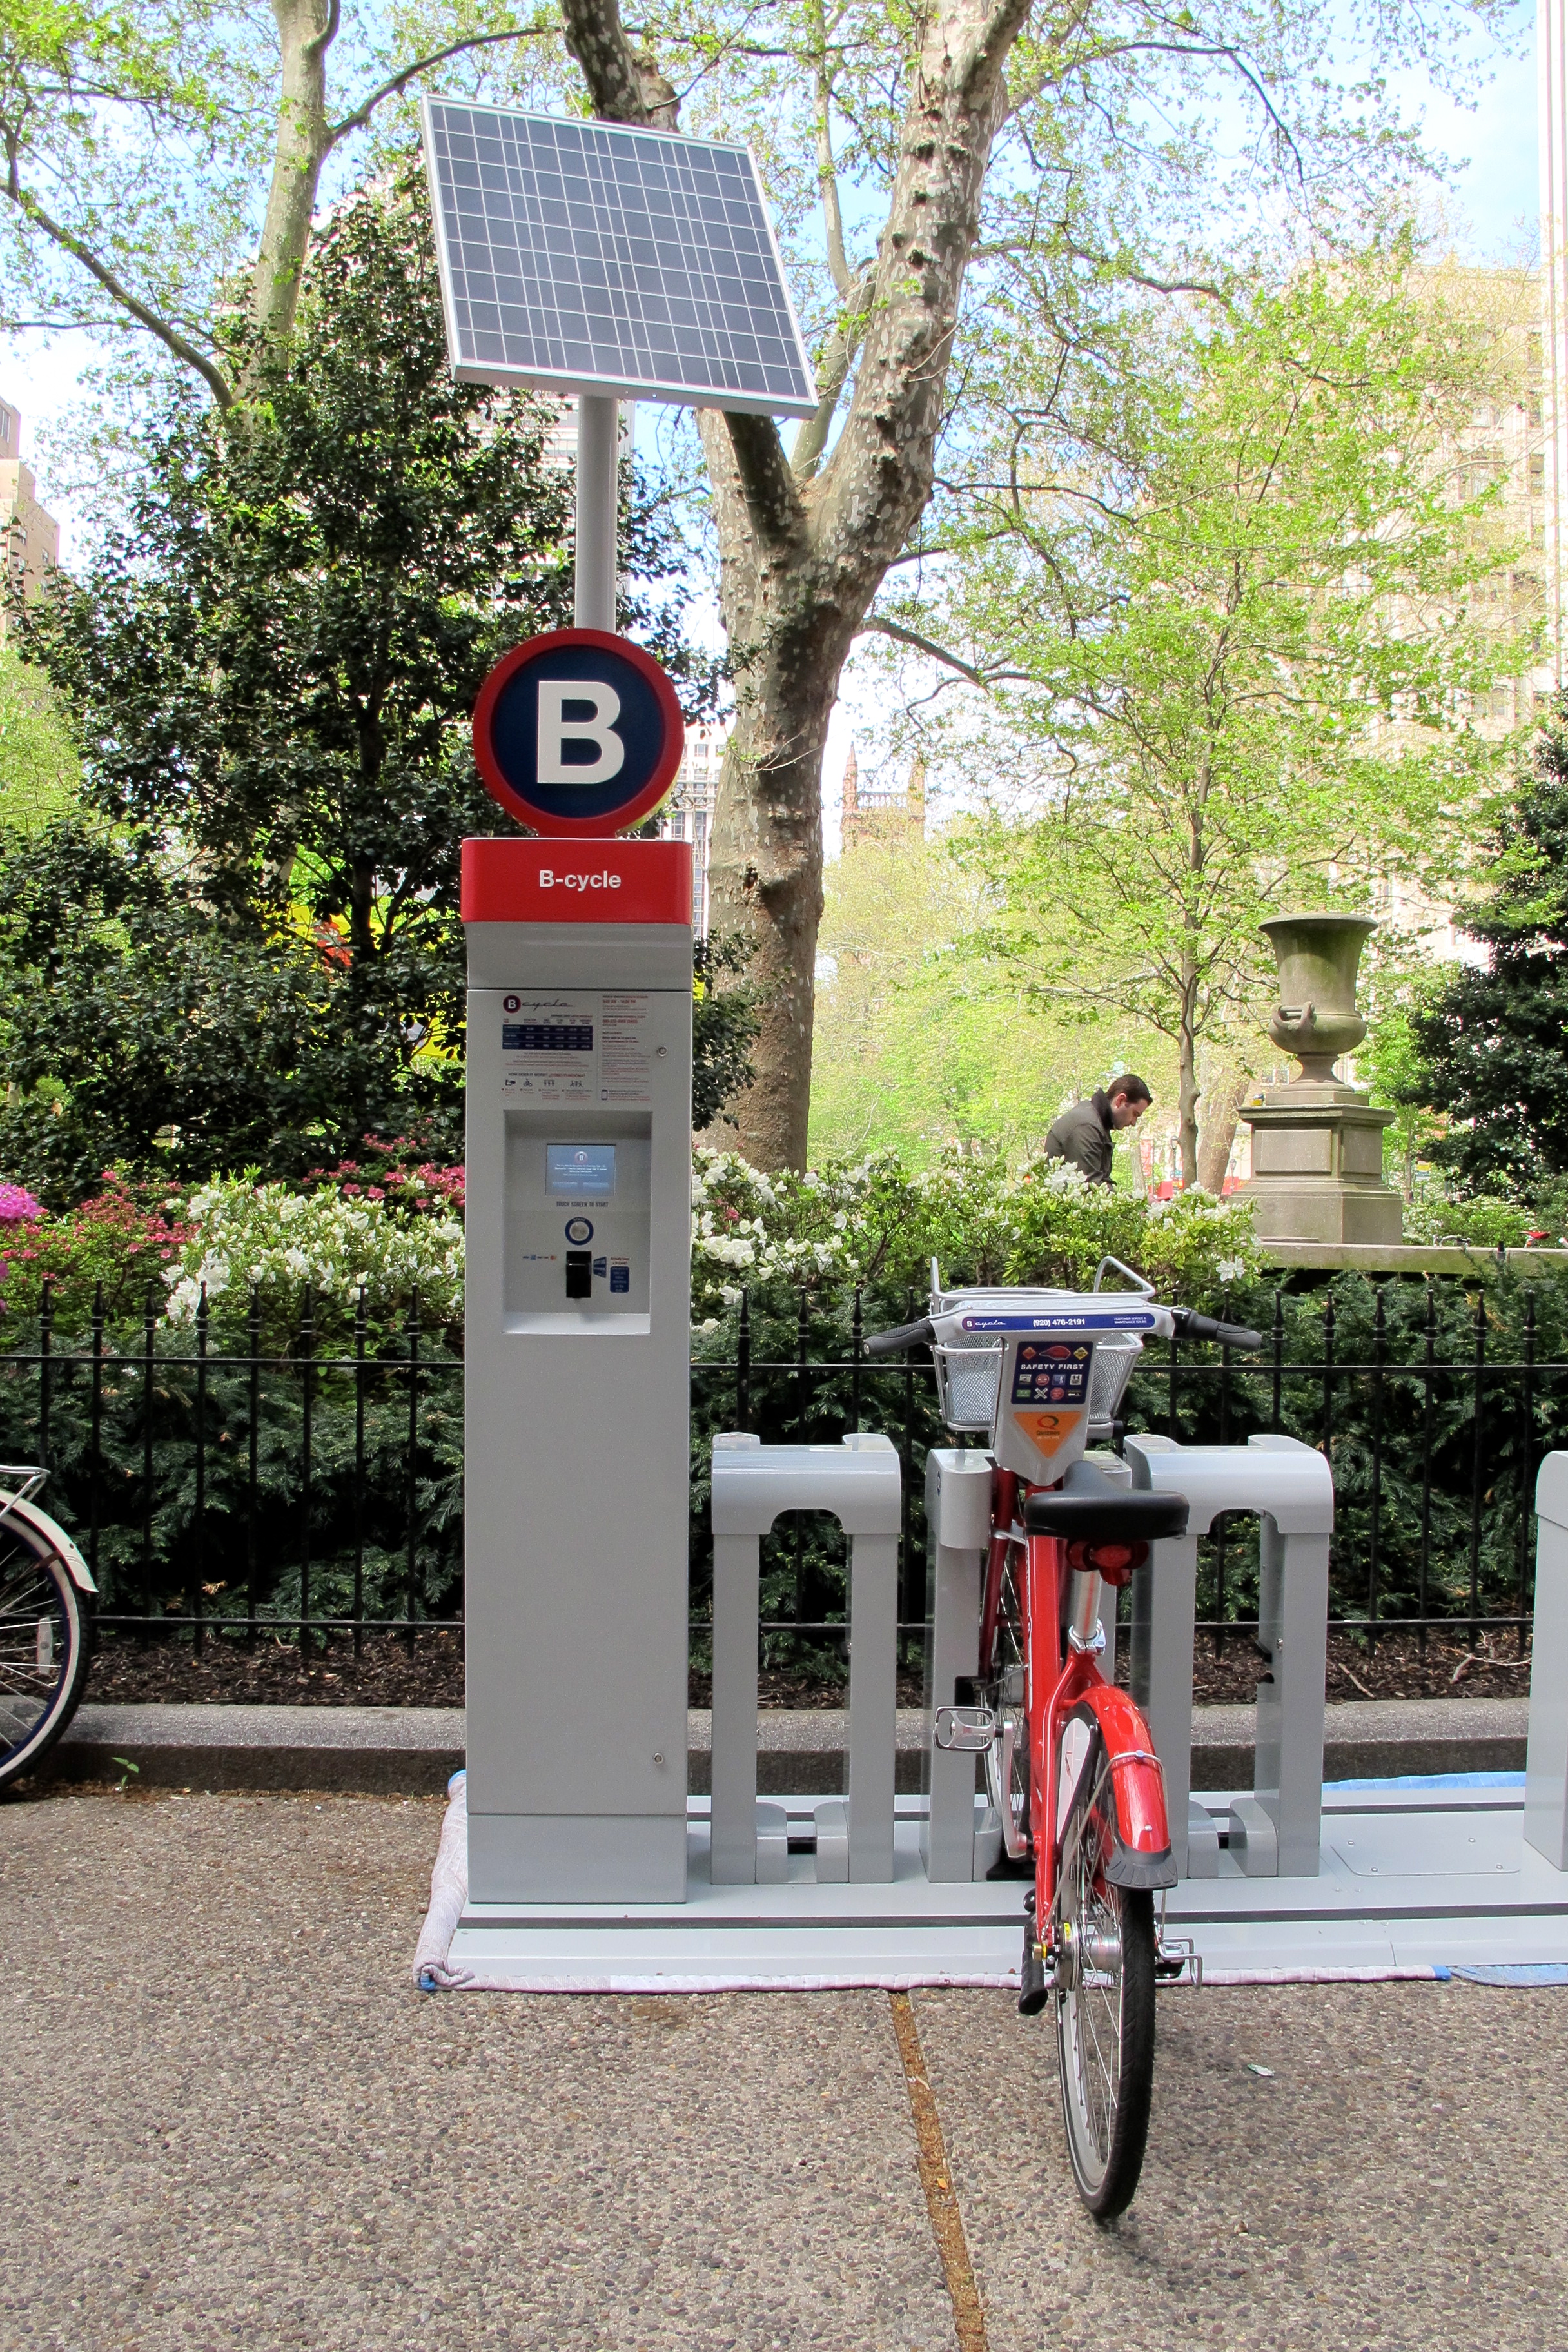 A B-cycle station